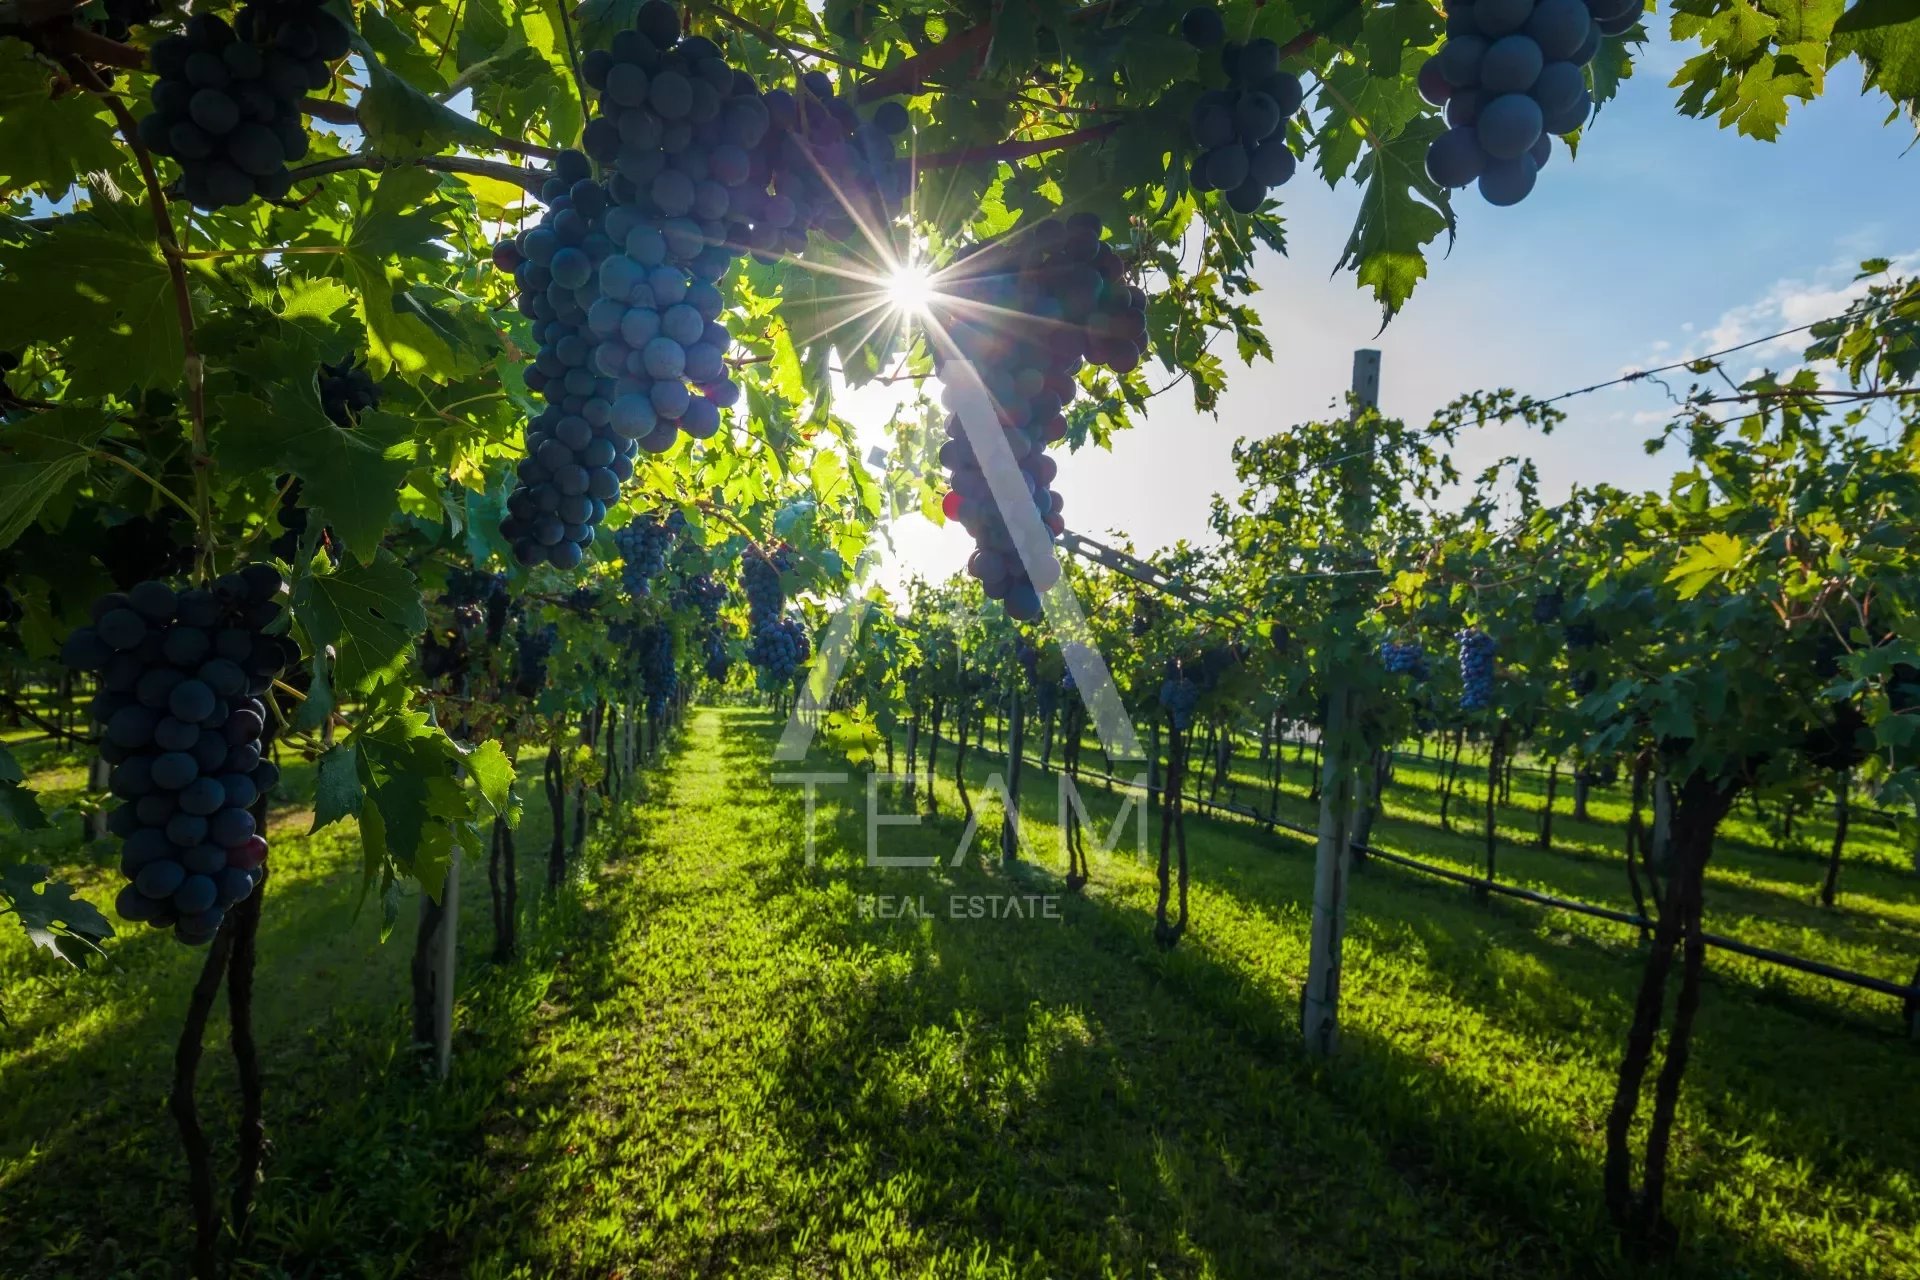 country,sunrise,seedless,vino,grapevine,fruit,rural,tuscany,sun,summer,agriculture,growing,vineyard,napa,farm,ripe,california,colored,tradition,winery,vine,italy,redding,sangiovese,harvest,green,grow,